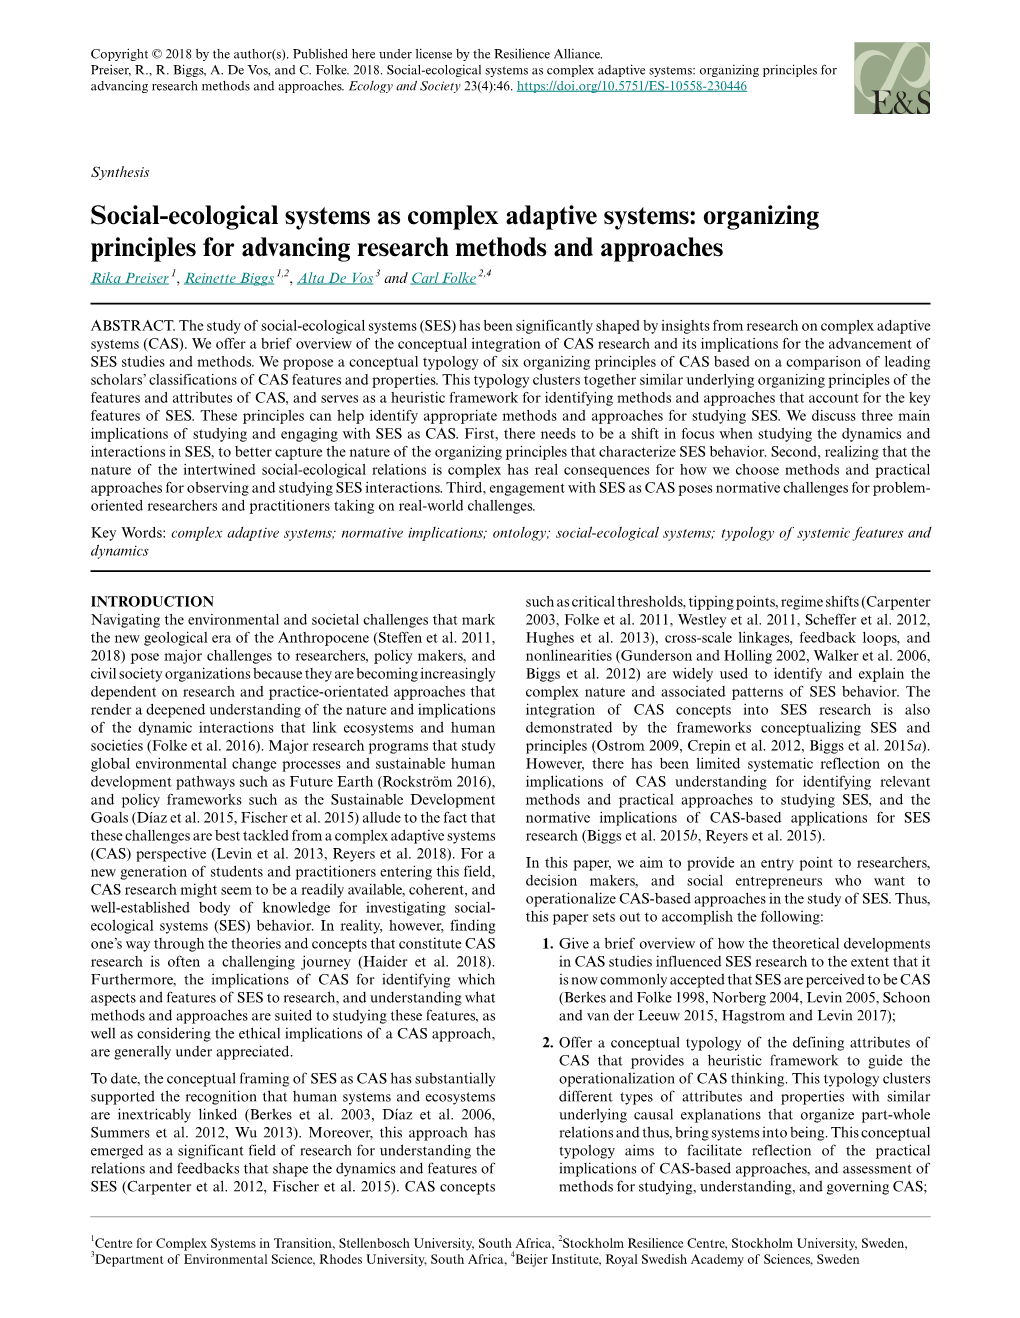 Social-Ecological Systems As Complex Adaptive Systems: Organizing Principles for Advancing Research Methods and Approaches